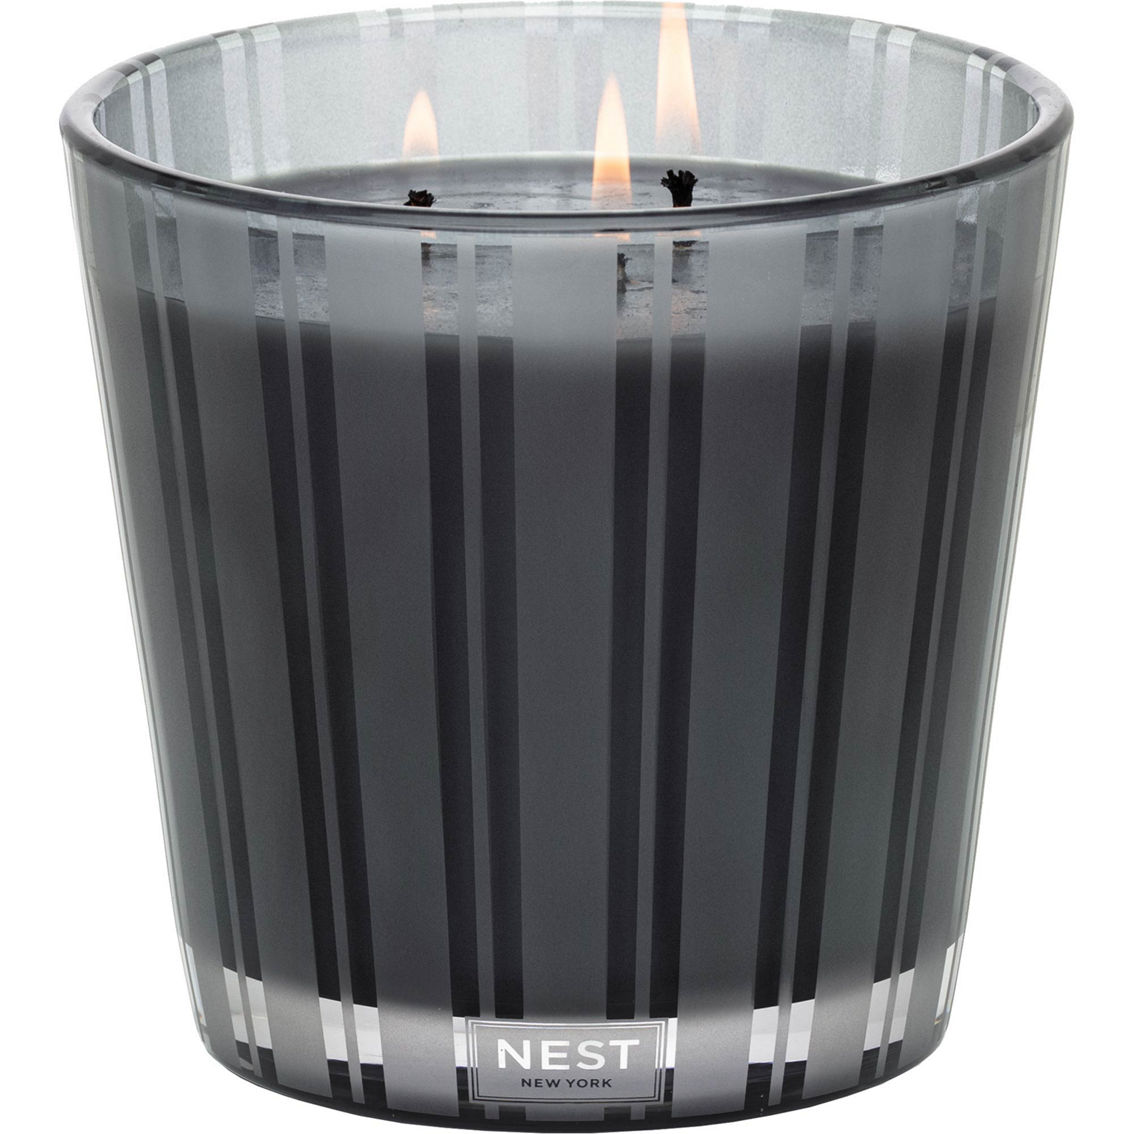 Nest New York Charcoal Woods 3 Wick Candle - Image 2 of 2